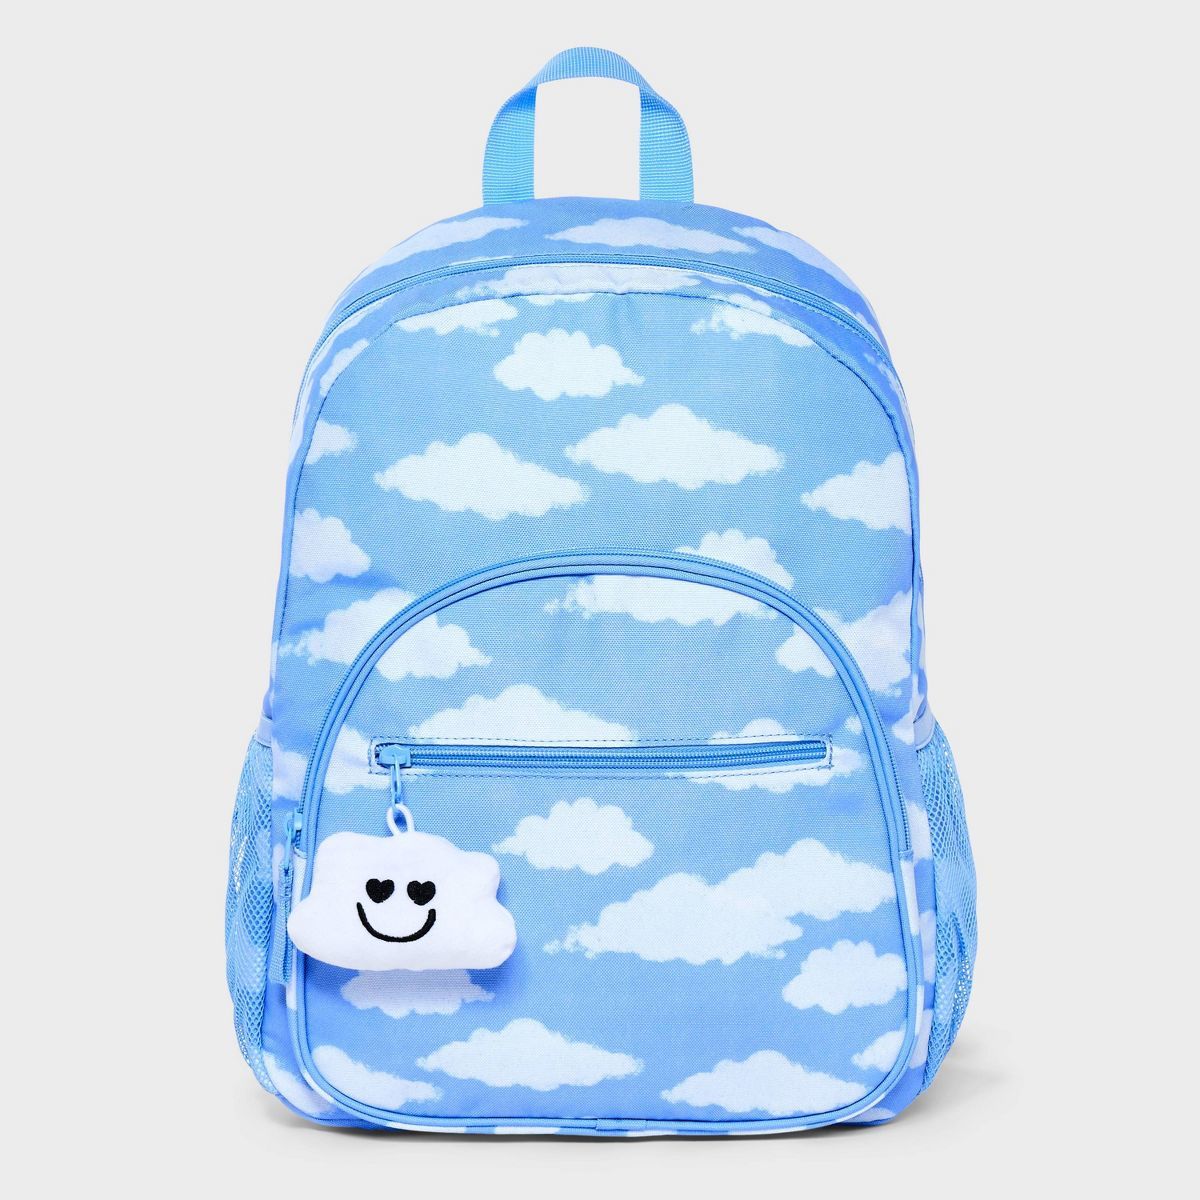 Girls' 16" Backpack with Charm - art class™ | Target